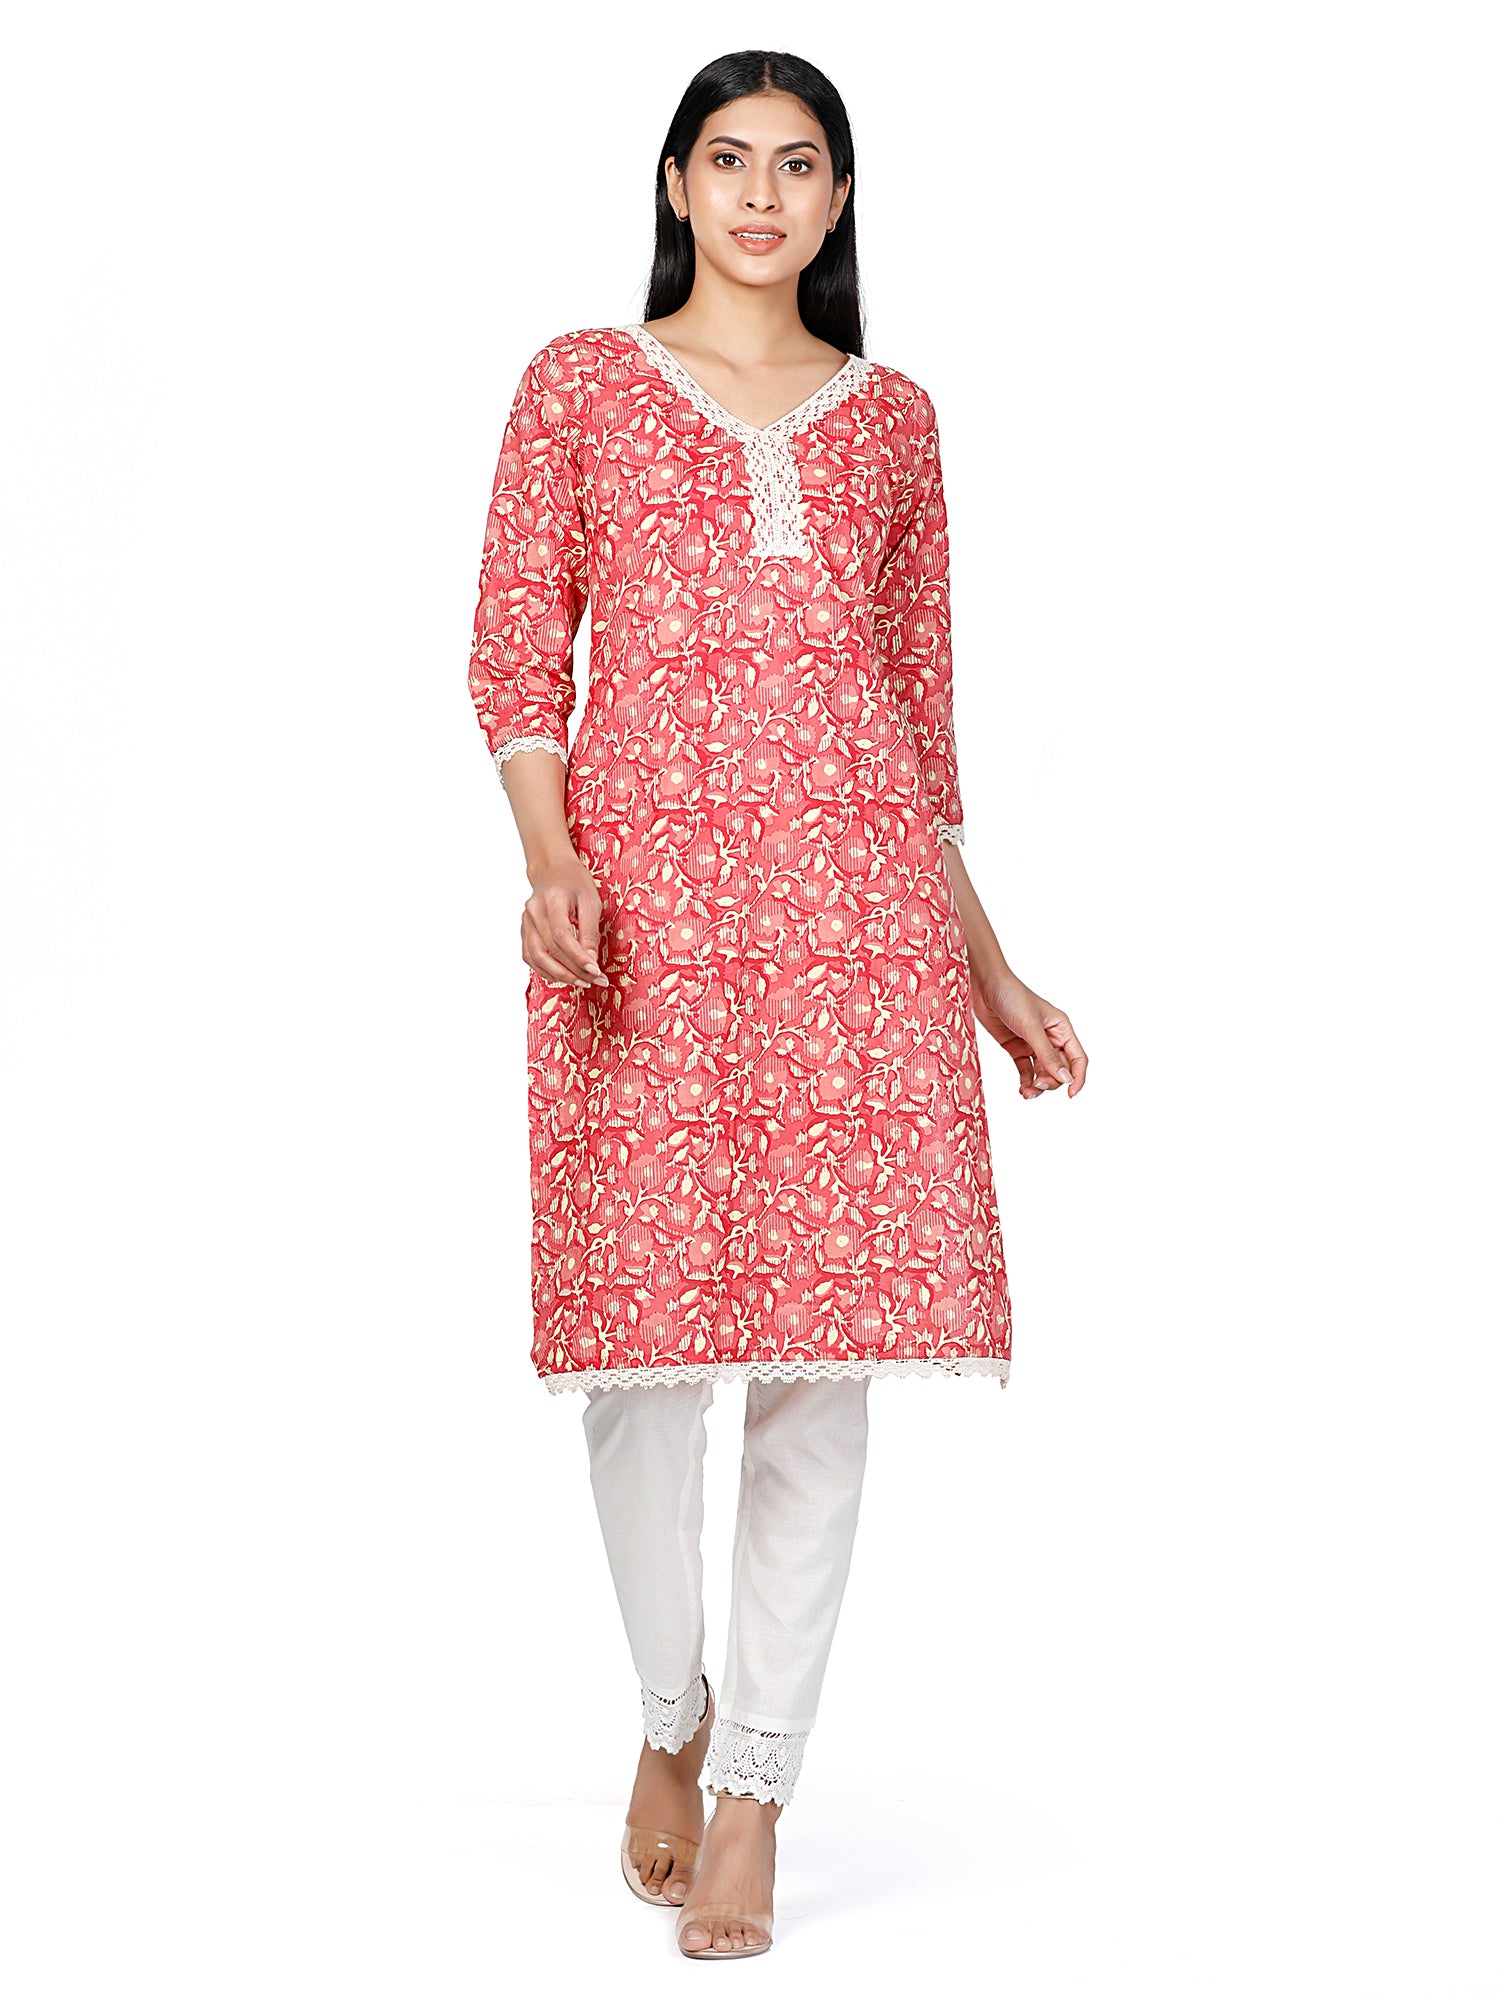 Women Woven Cambric Floral Printed Lace Work Peach Kurta